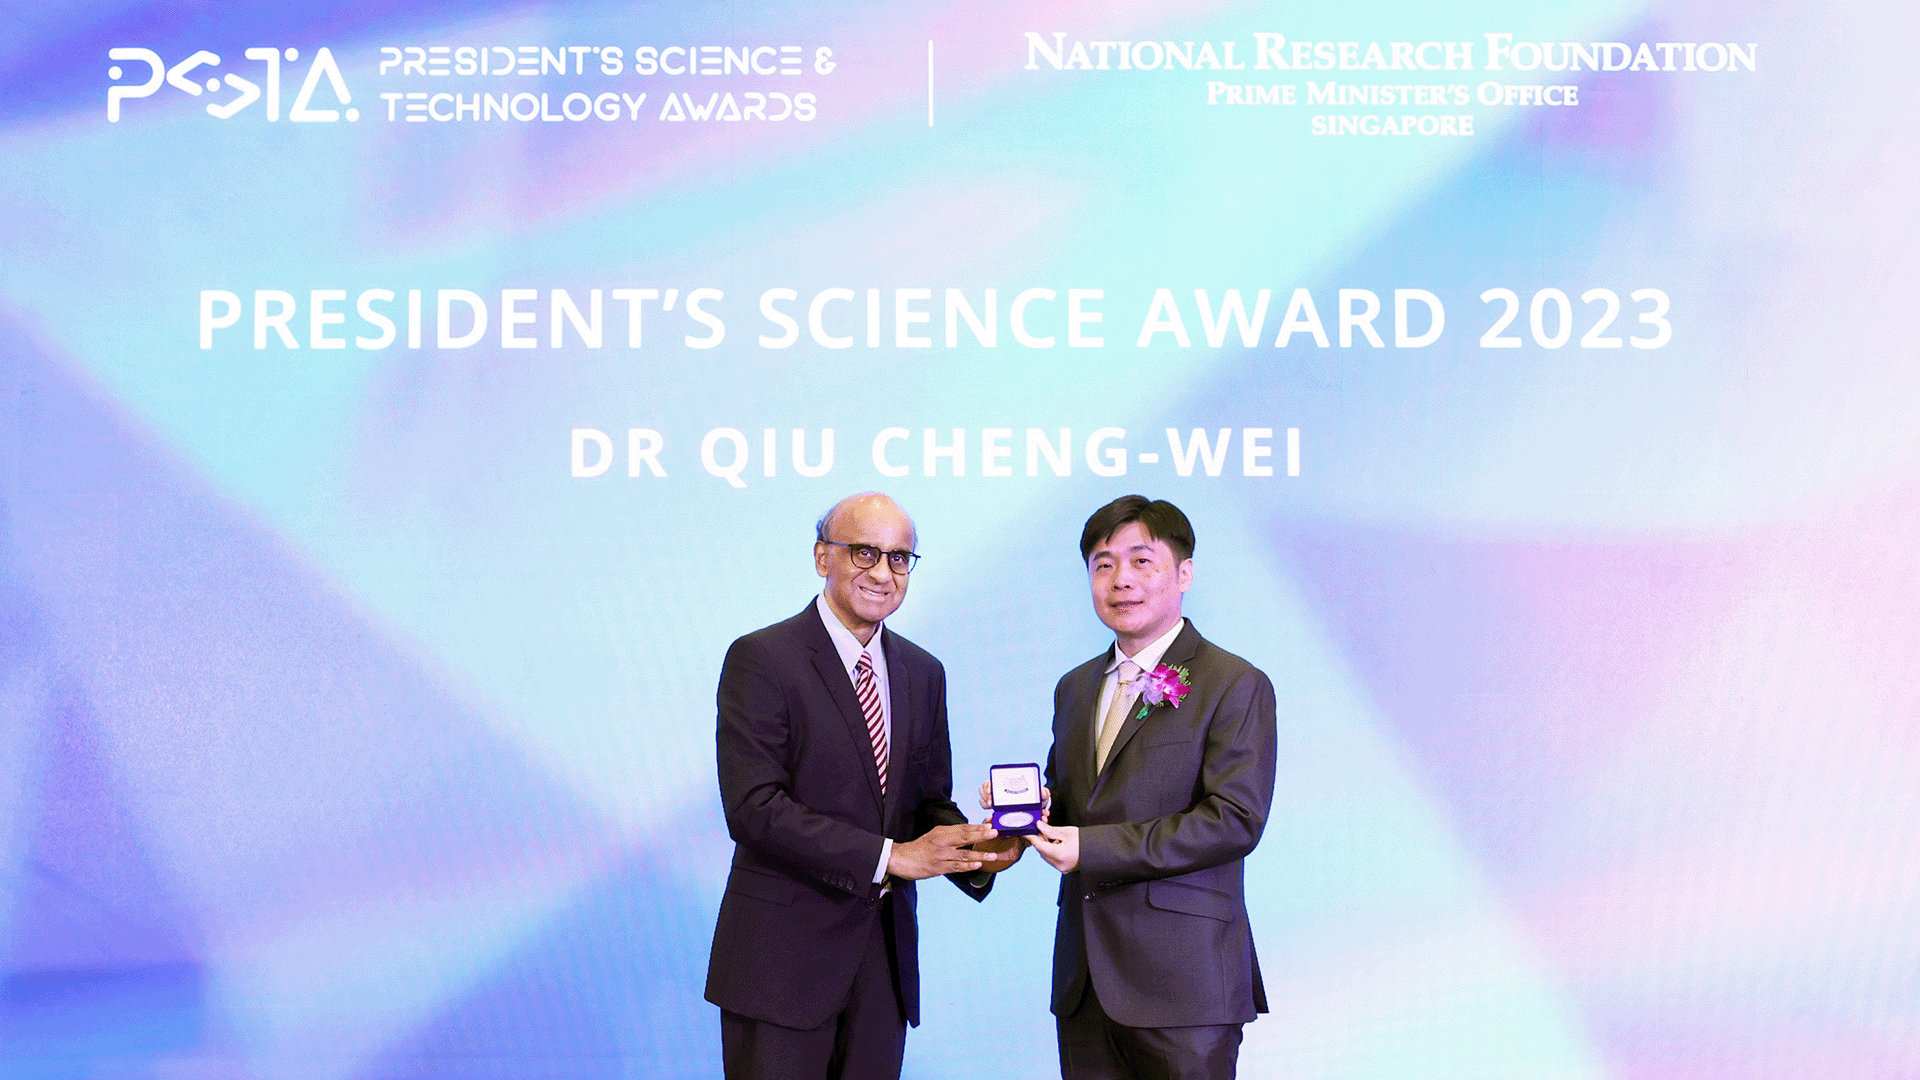 Assoc Prof Qiu Cheng-Wei (right) was presented with the award by President Tharman Shanmugaratnam. (Credit: MCI Photos by Chwee)